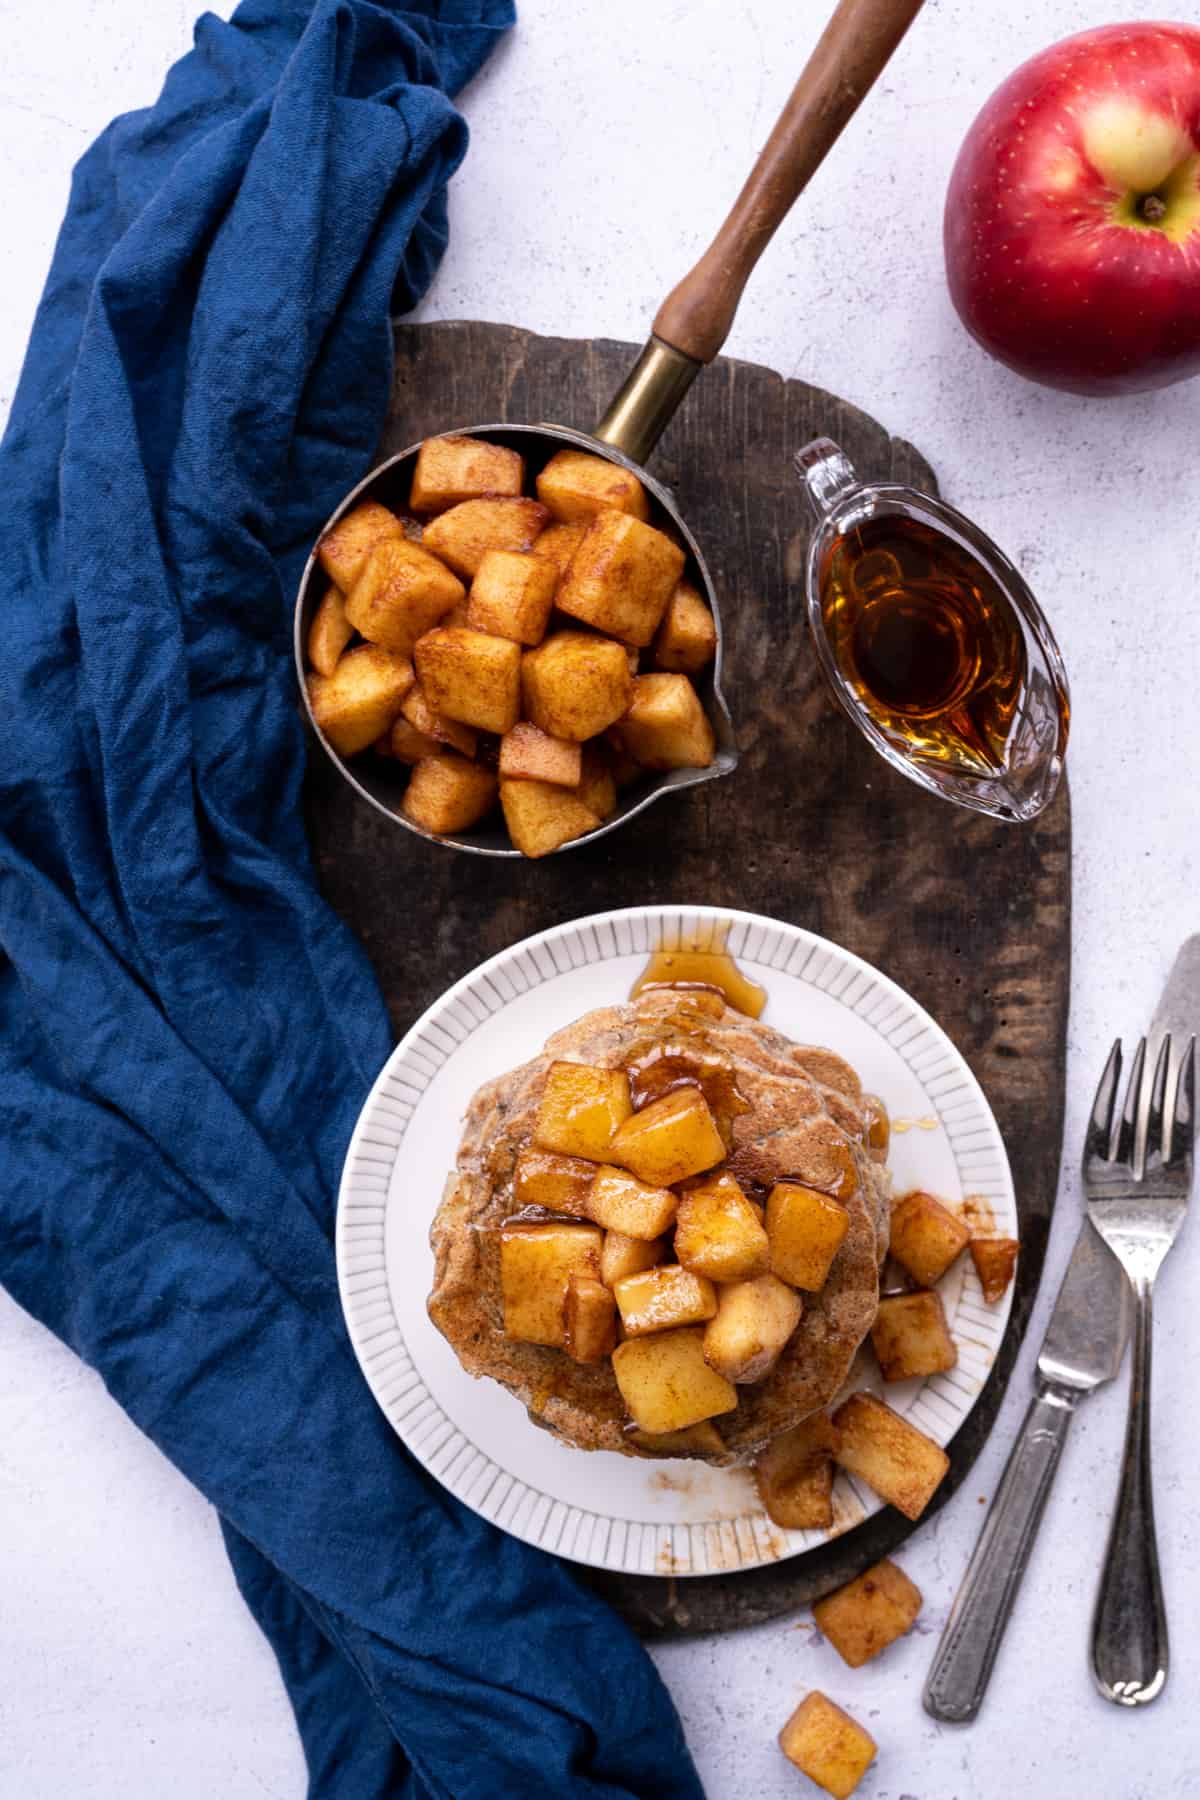 apple buckwheat pancakes on plate with side of maple apples.